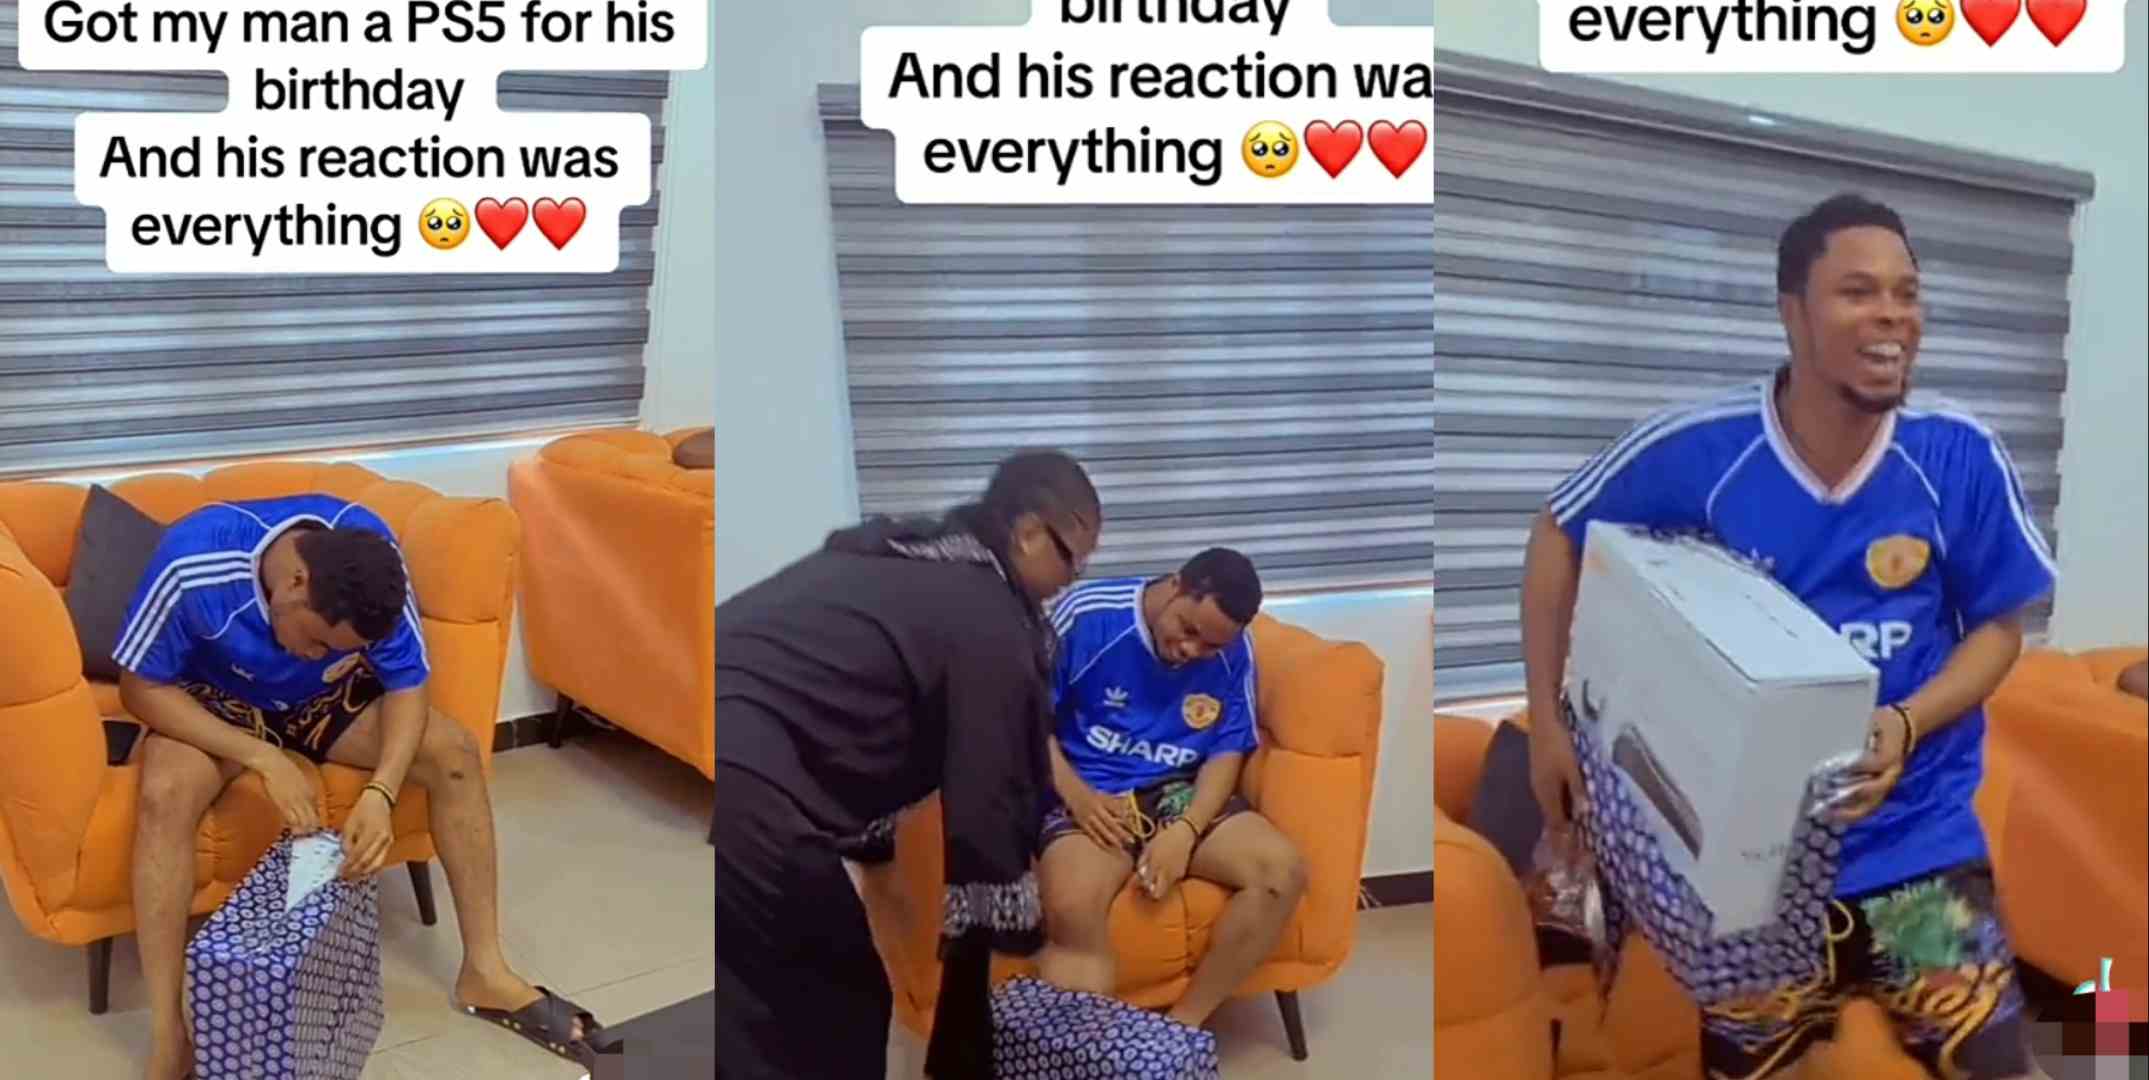 Lady shares boyfriend's reaction as she buys N475K PS5 for his birthday (Video)